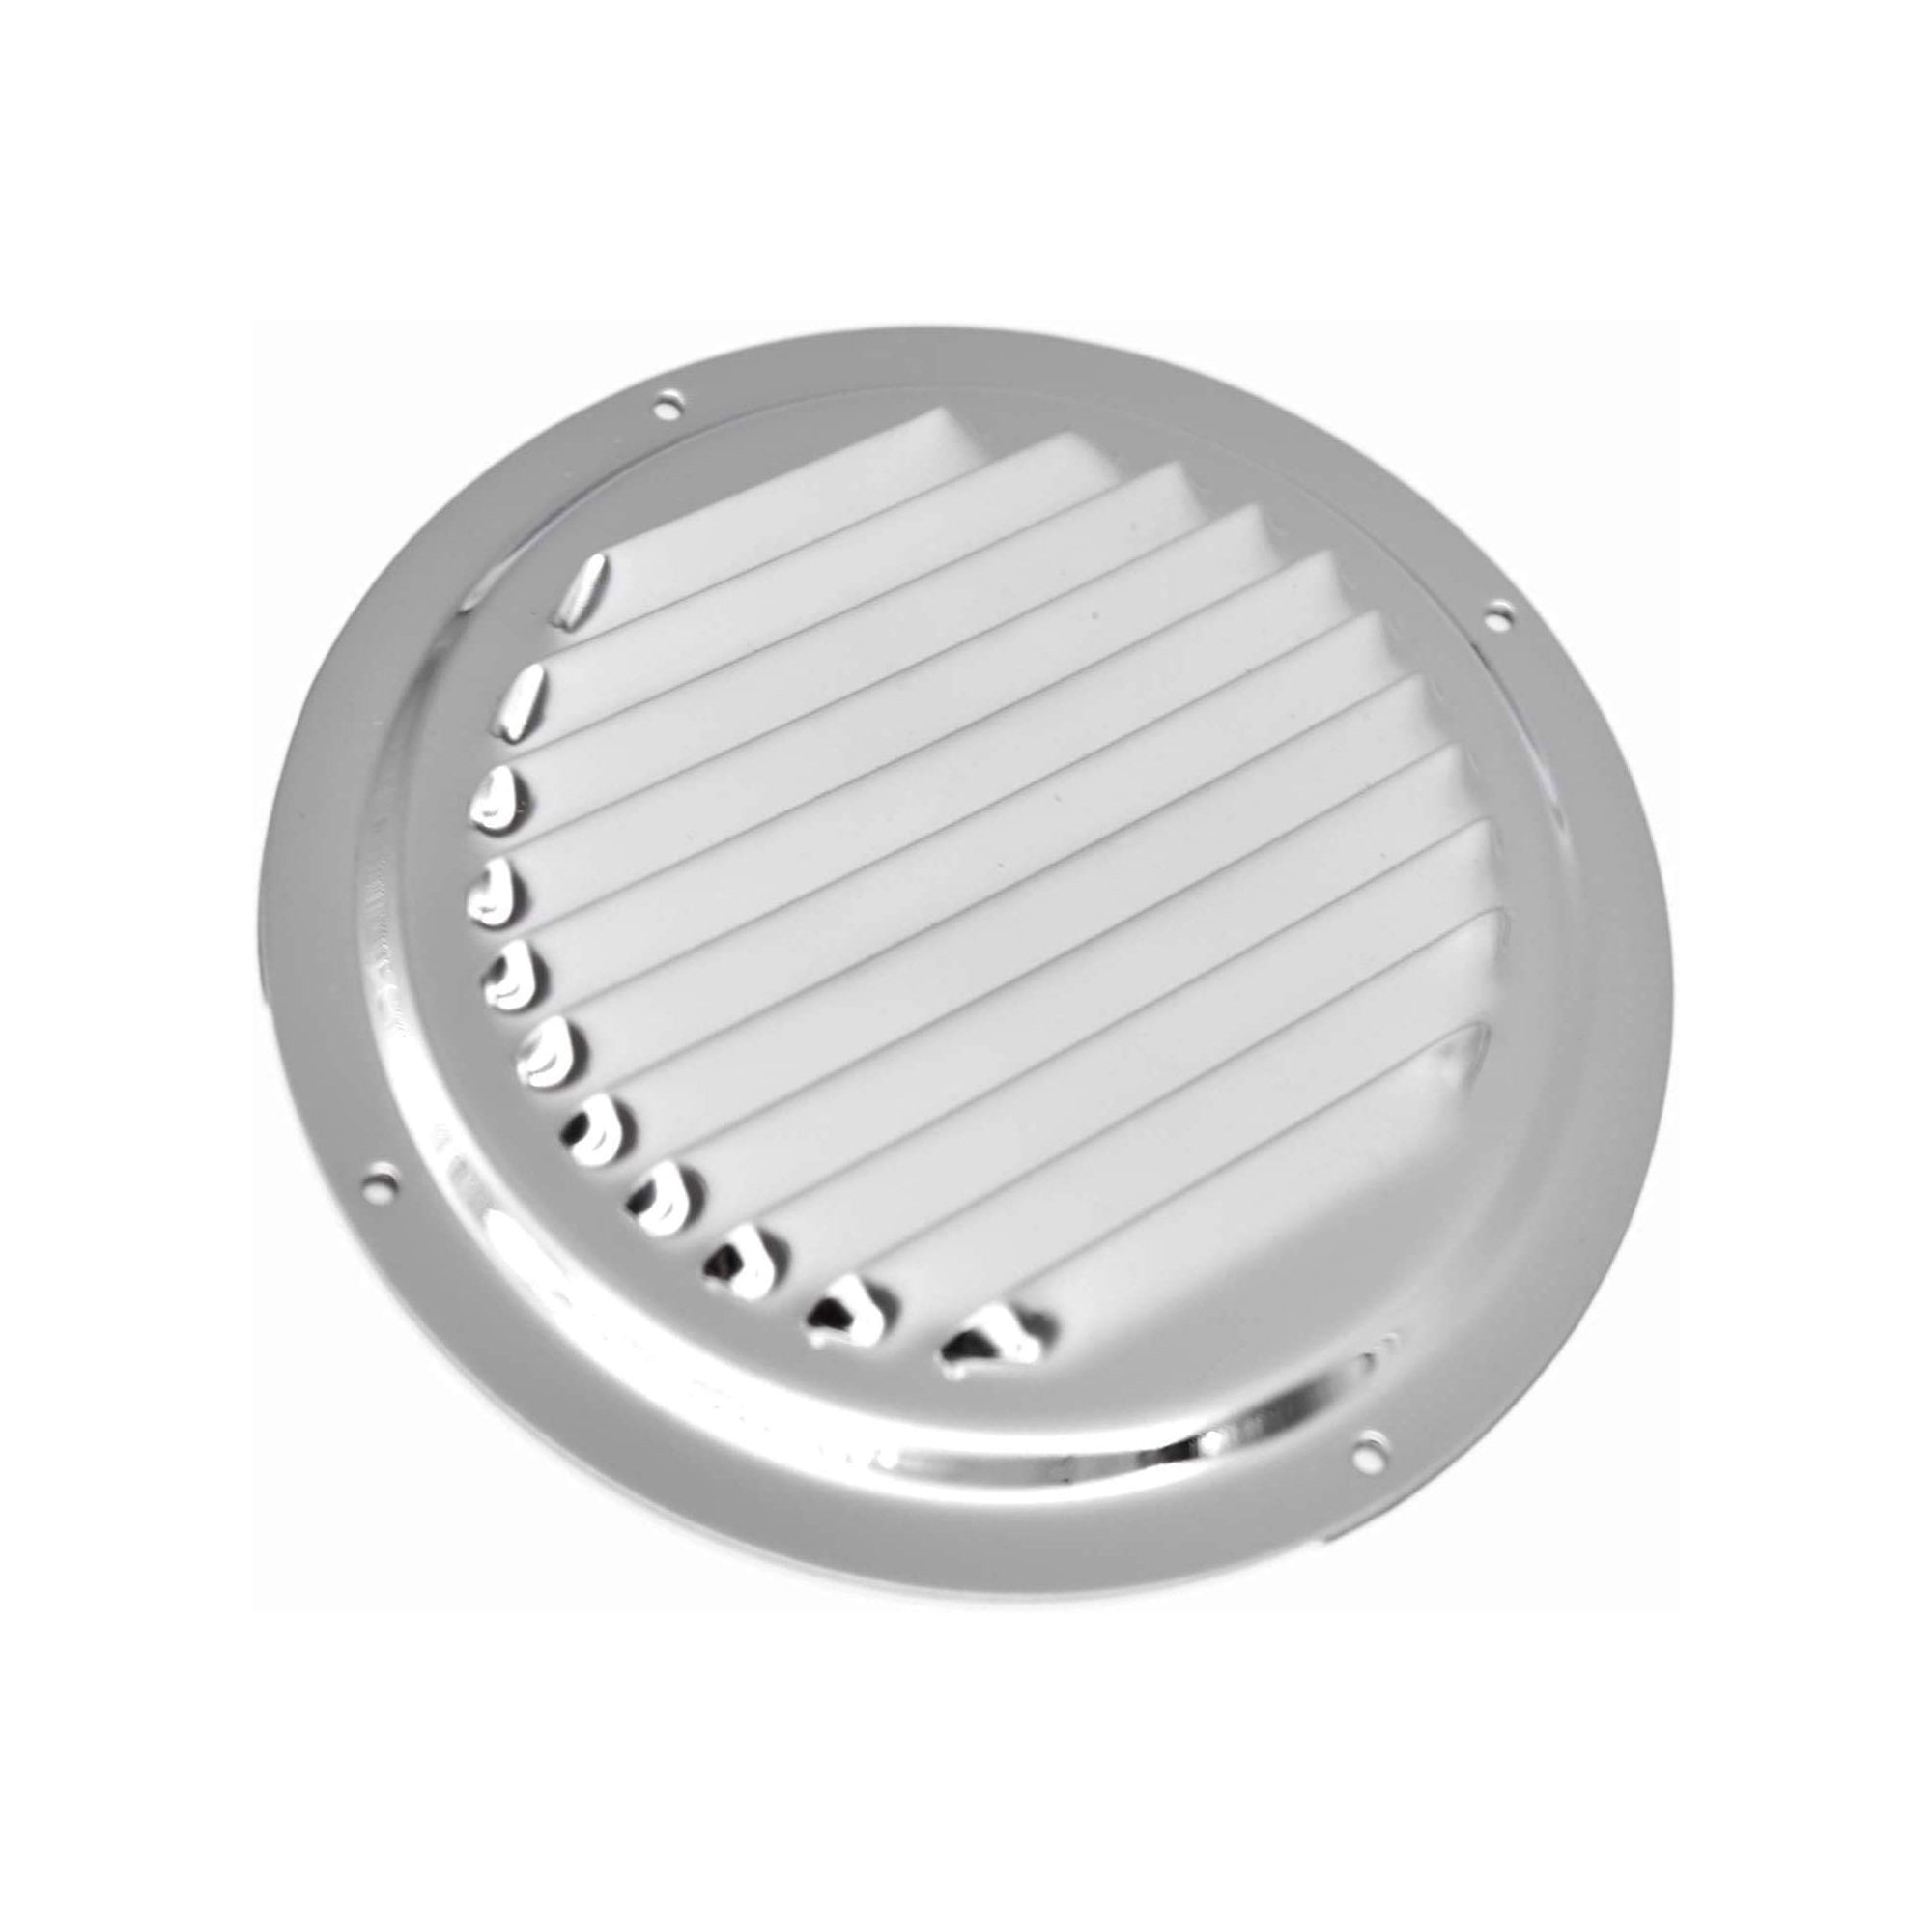 Marine City Stainless-Steel 4 Inches/ 5 Inches/ 6 Inches Round Louvered Vent...